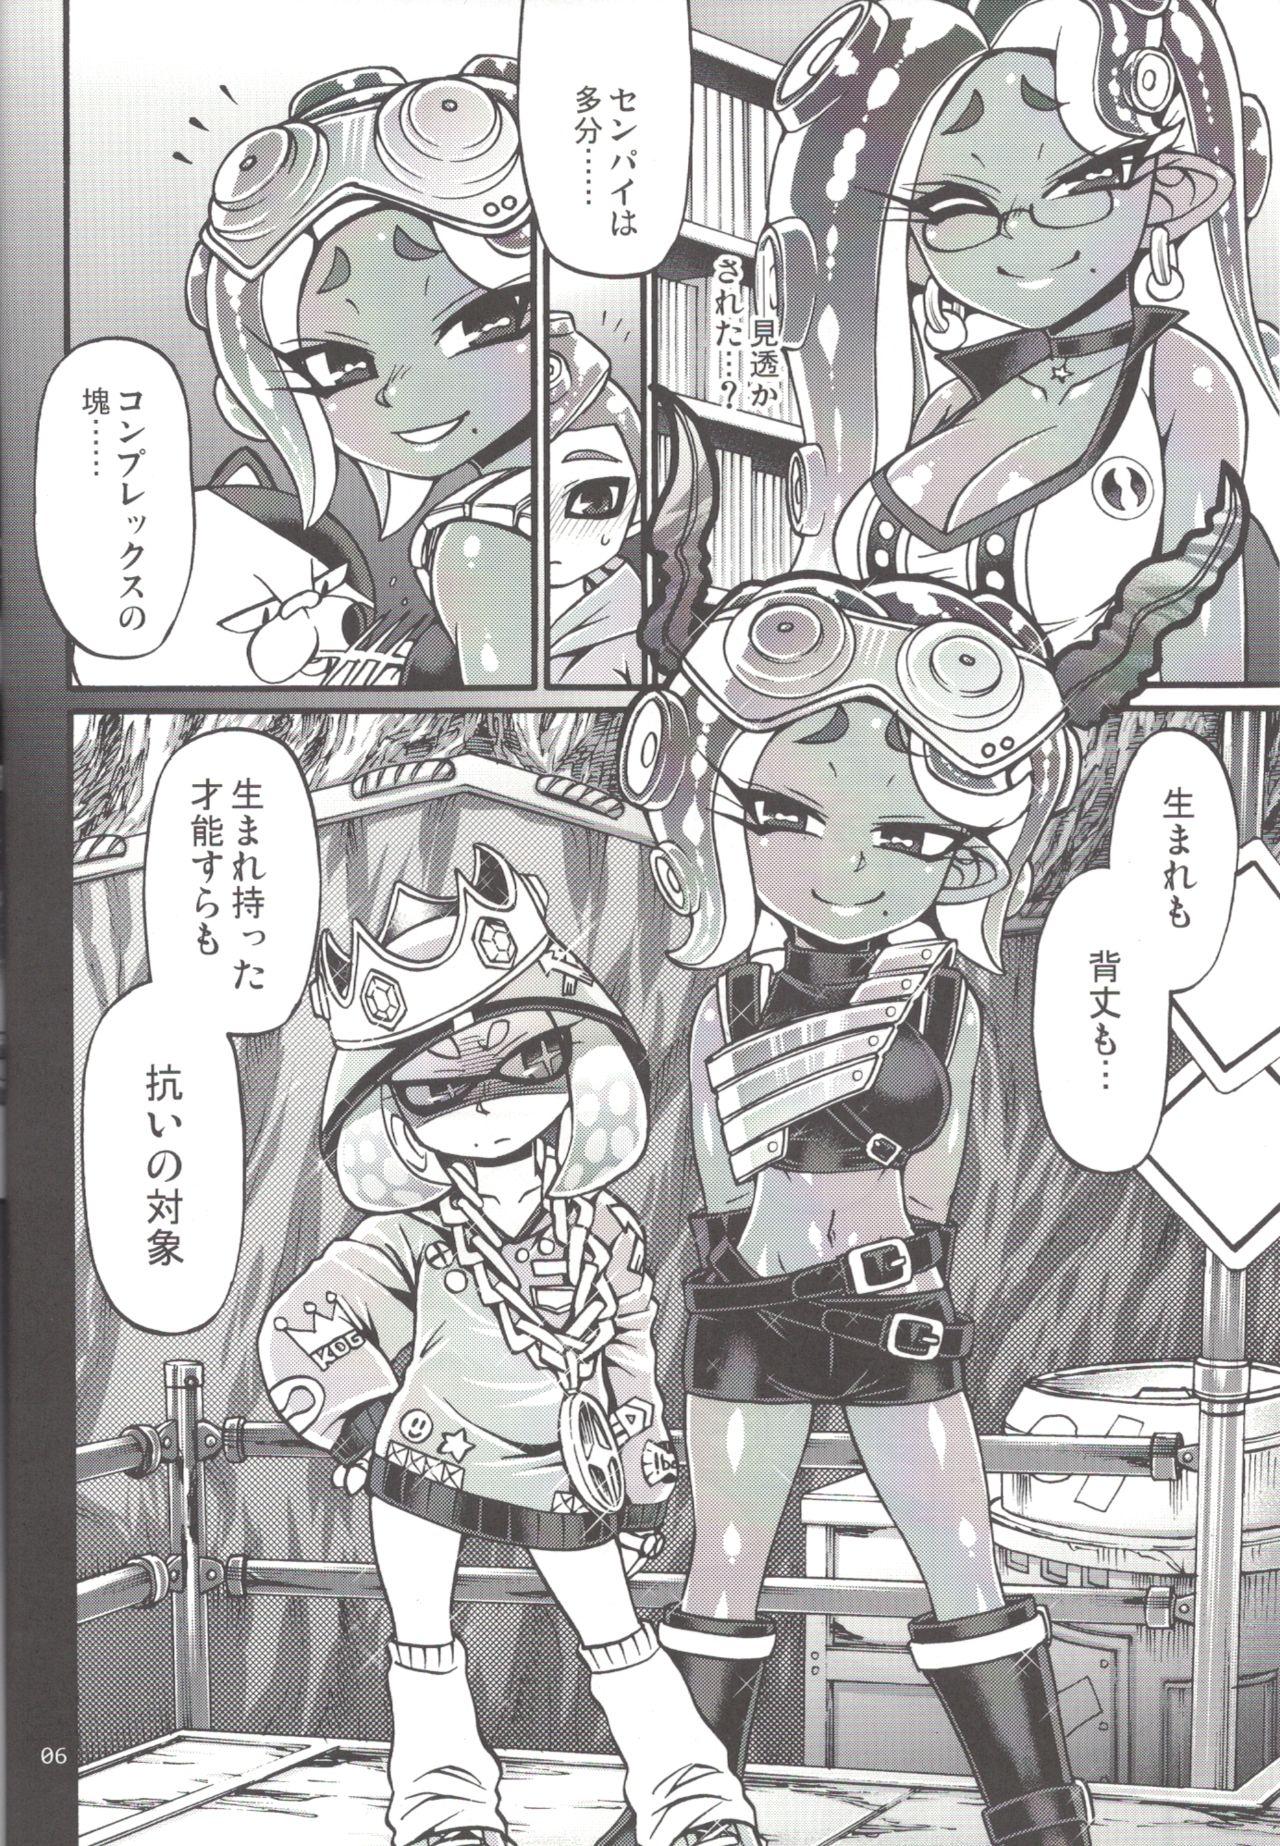 Analsex Slowly you will be loved - Splatoon Asslicking - Page 5